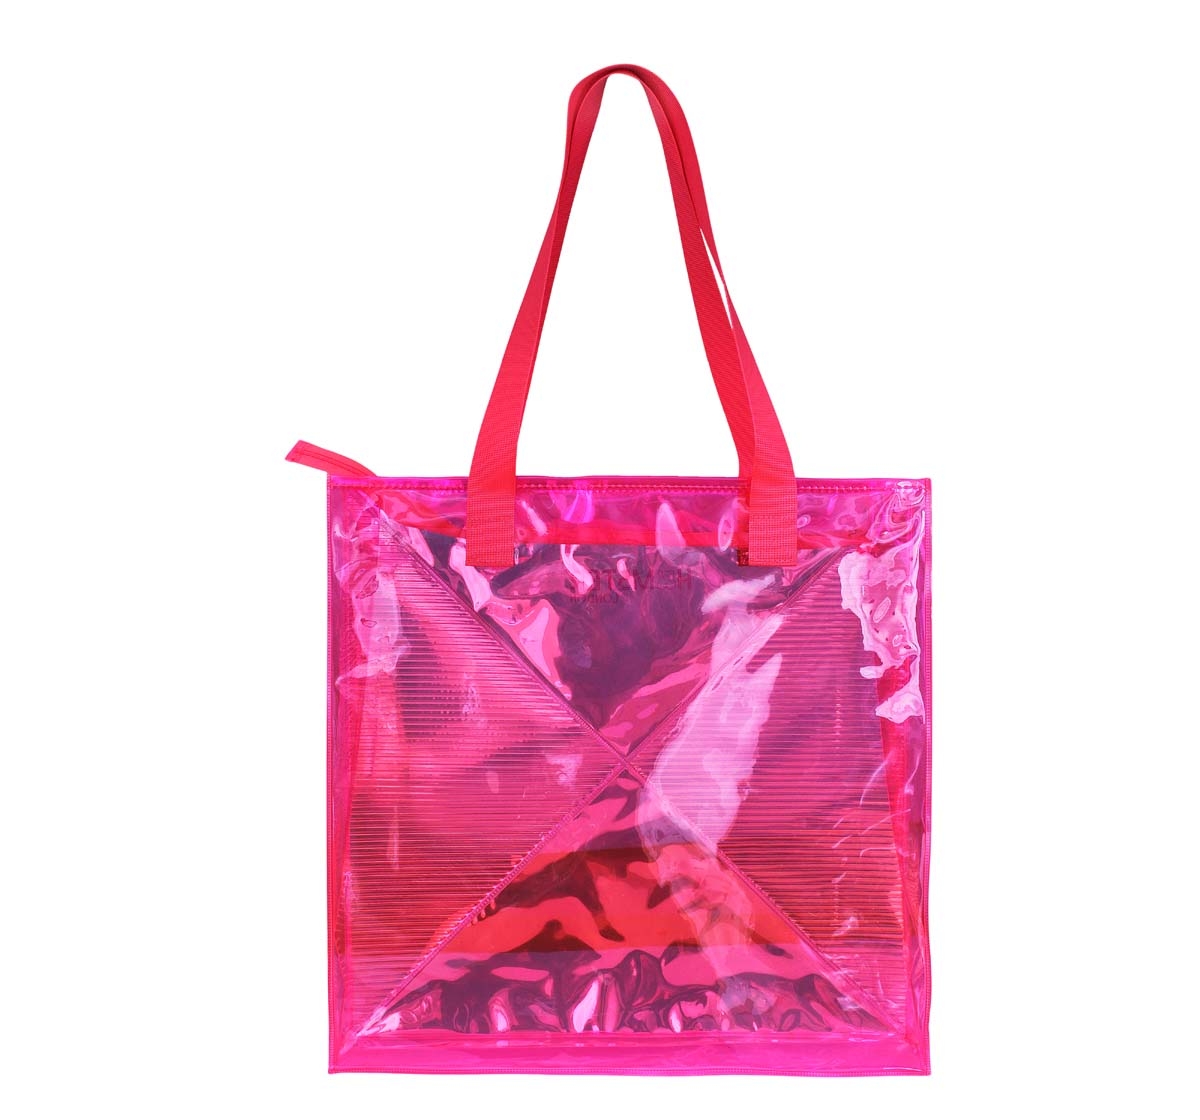 Hamster London Classic Tote Bag Pink Bags for Girls Age 3Y+ (Pink)